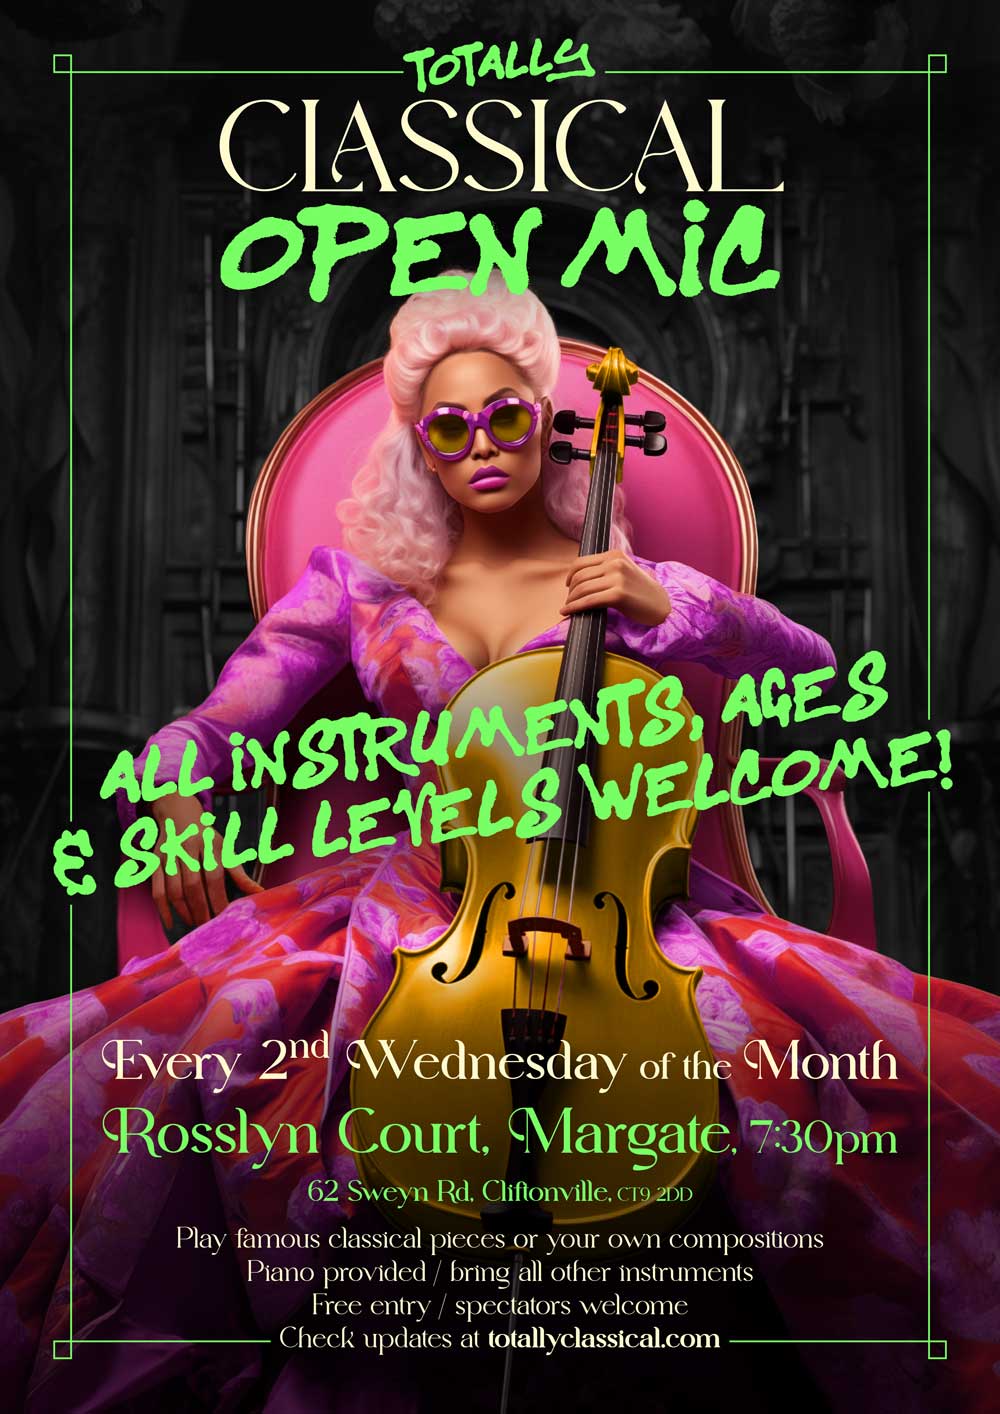 Classical Open Mic Nights at Rosslyn Court